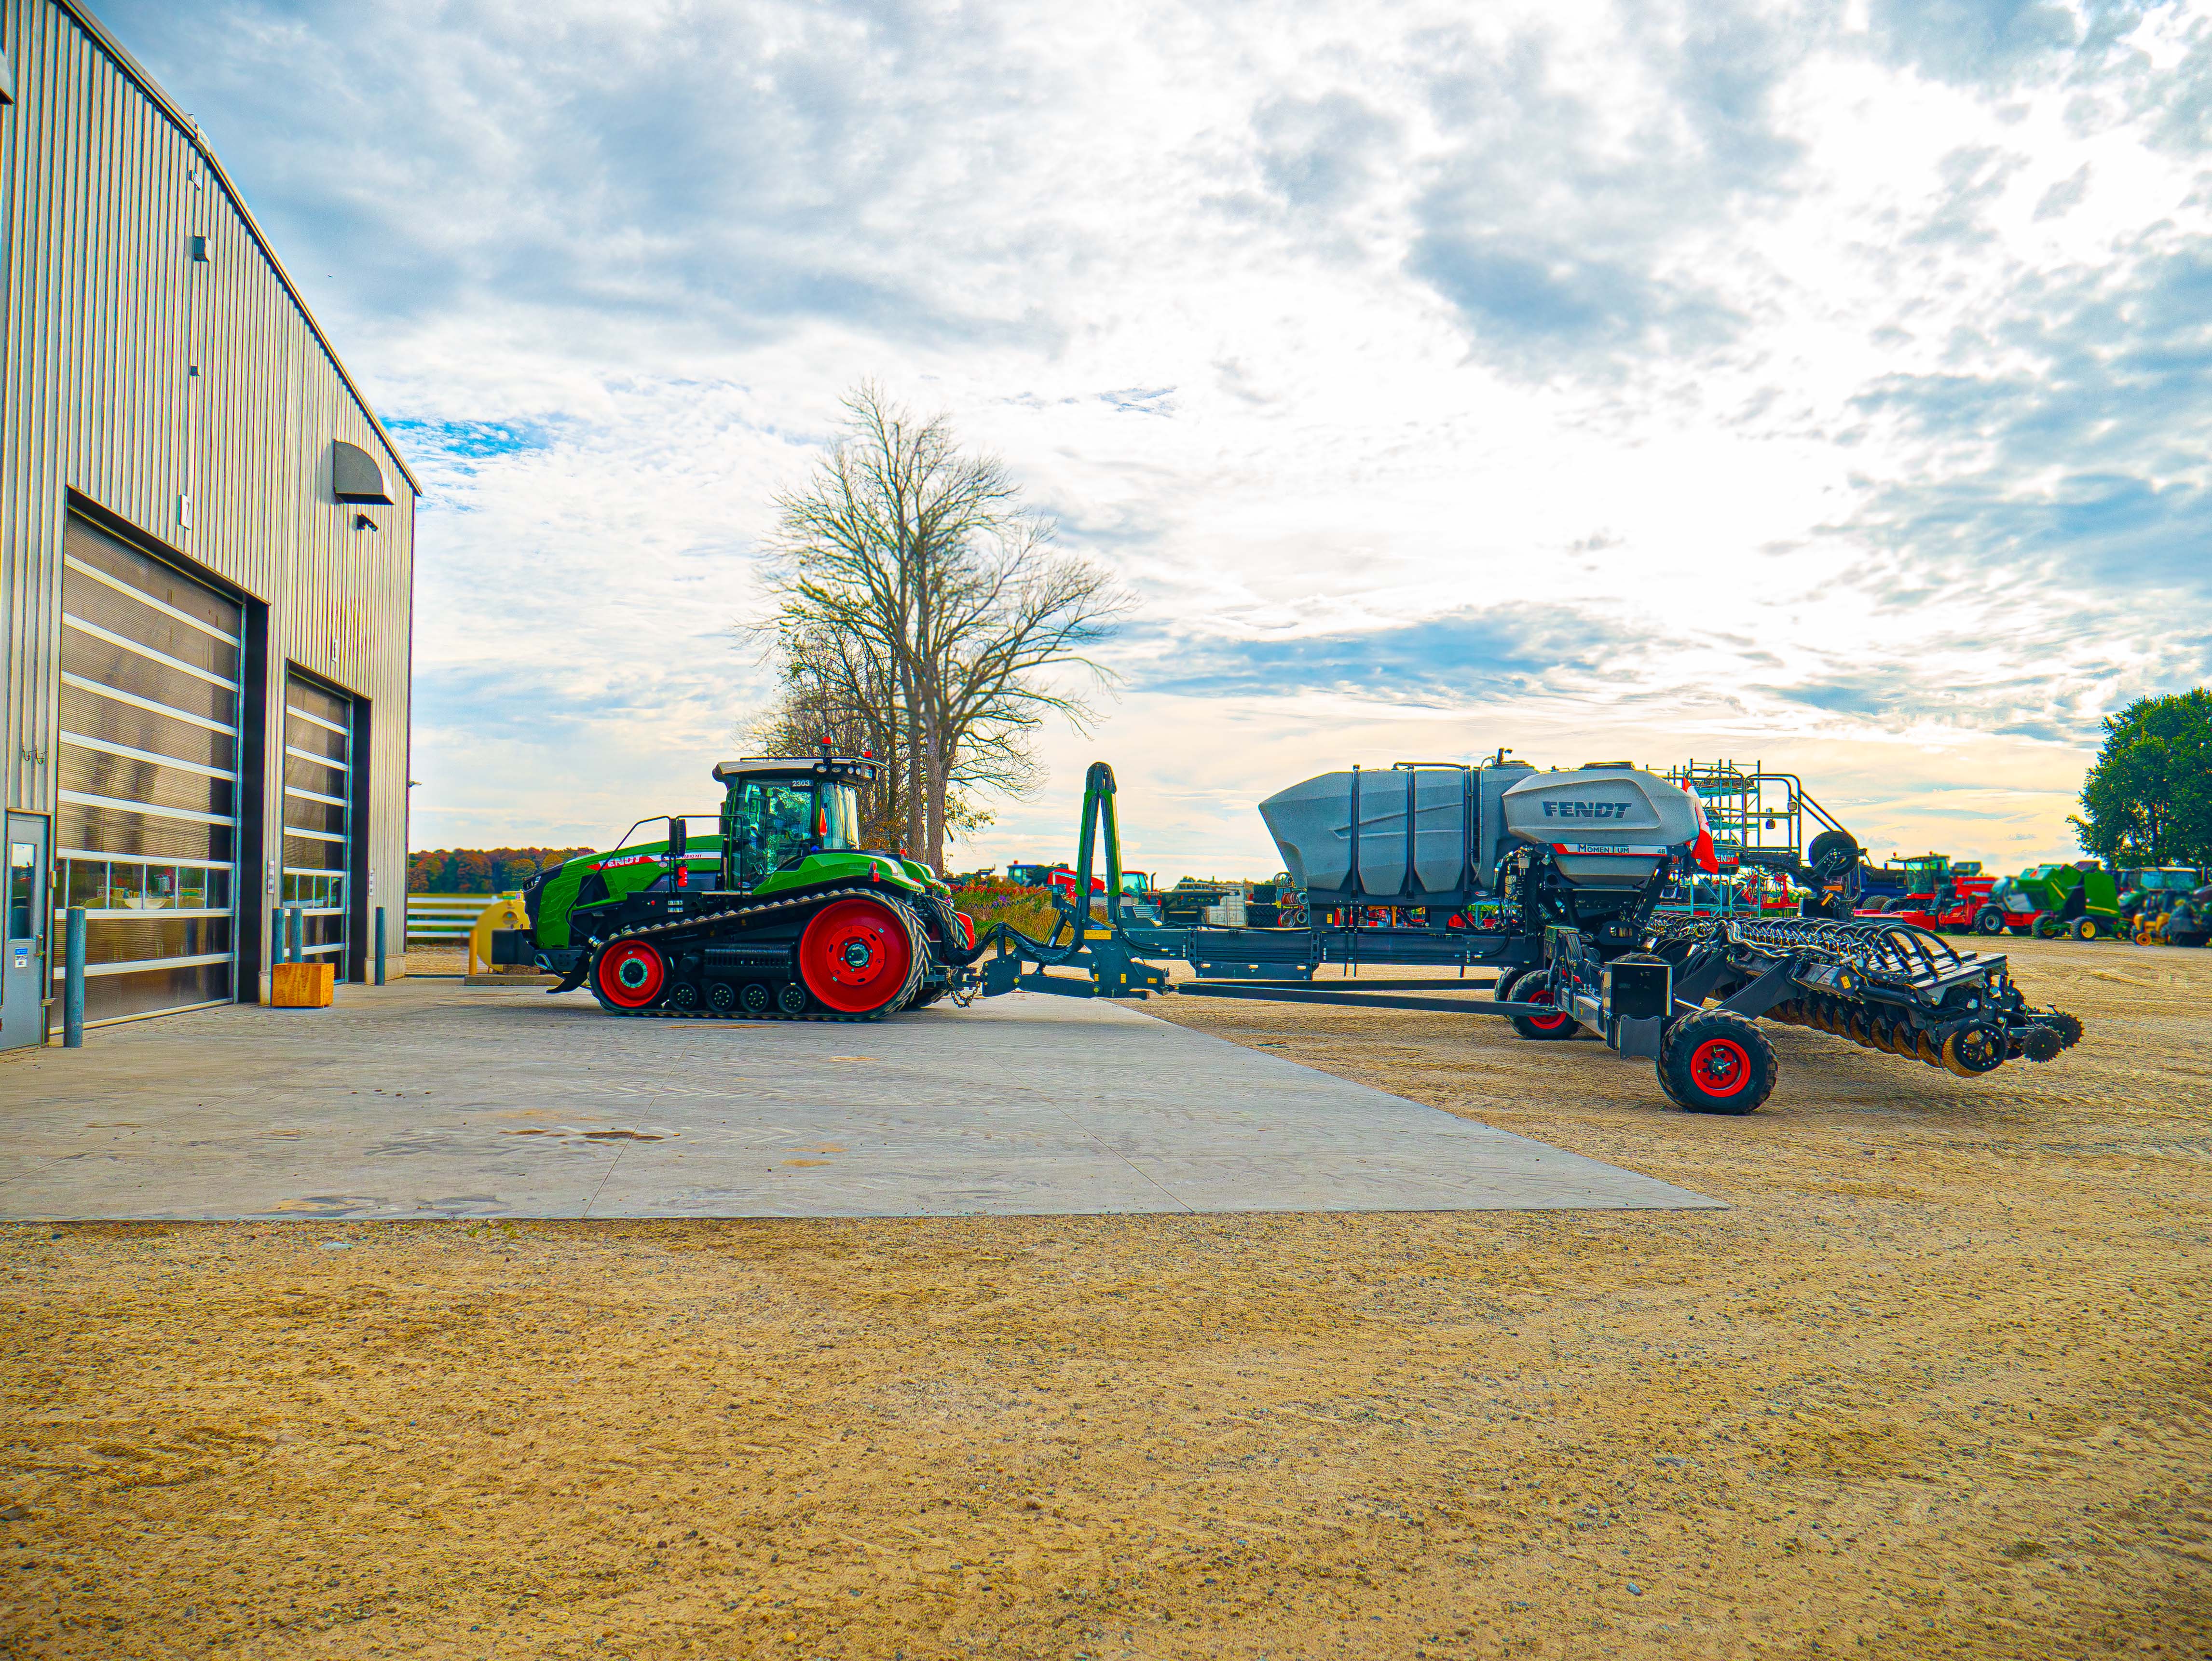 Fendt 1100 with Momentum Planter Sitting in front of Maple Lane's Mechanics Bay